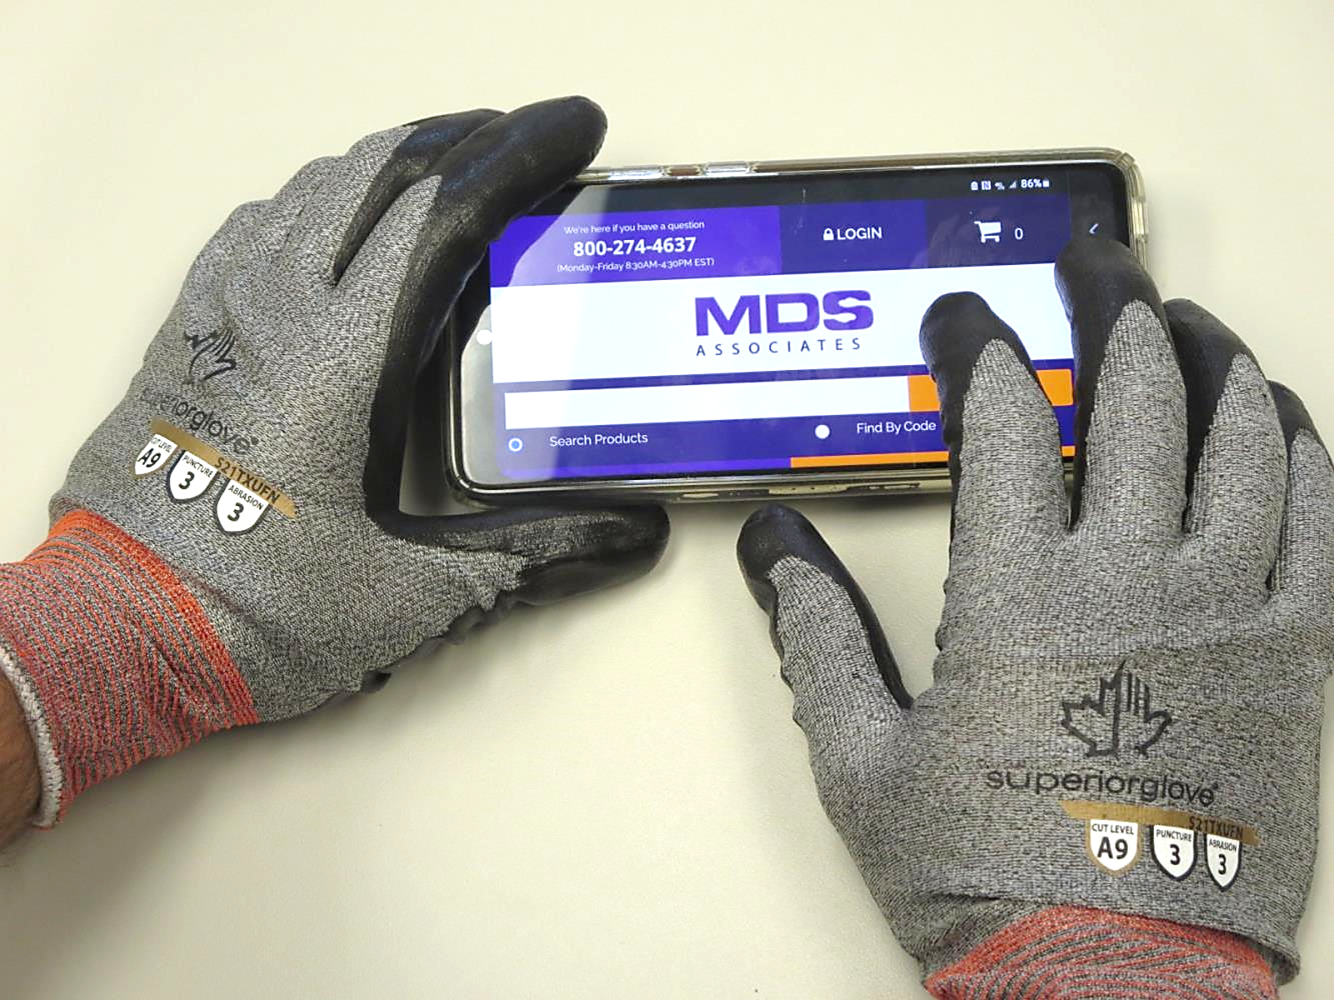 Heat Resistant Gloves; Cleanroom, Dry Contact, 210 F to 1400 F